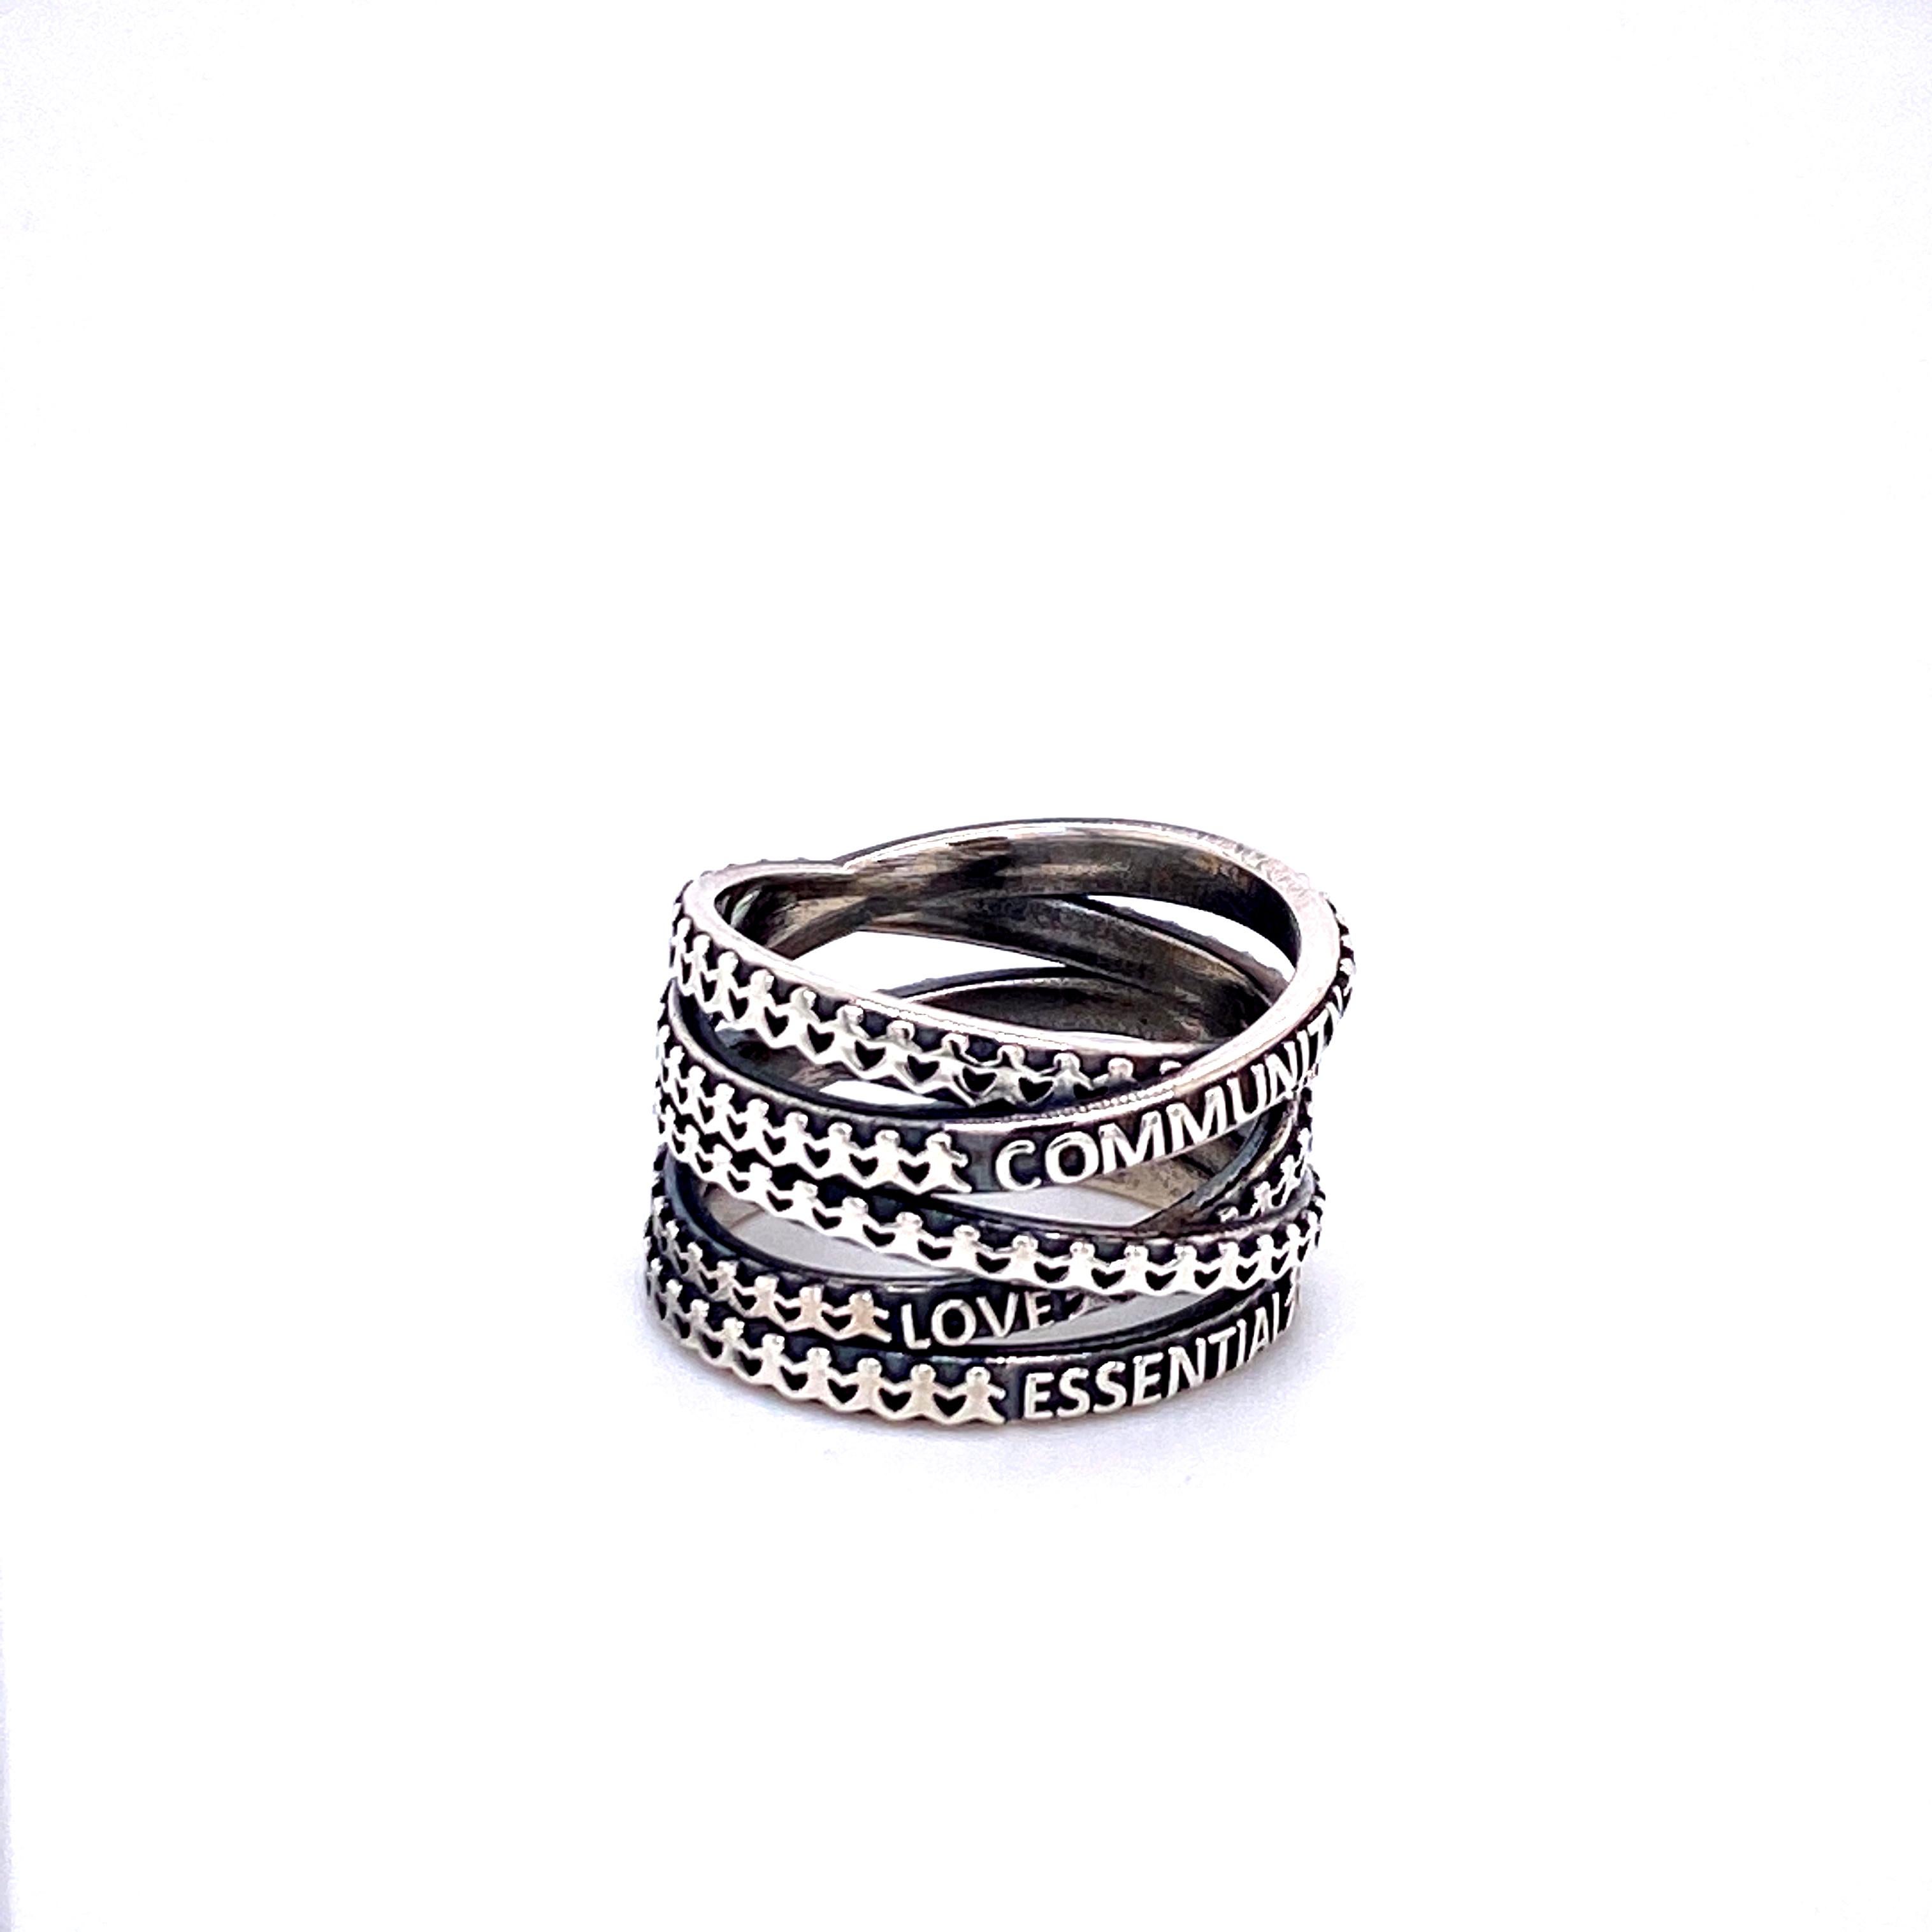 A narrow Not Non-Essential ring in oxidized sterling silver. This ring is a size 8. This ring was designed and made by llyn strong.

Due to the width of this ring it is recommended to order a half to full size larger than your usual ring size.